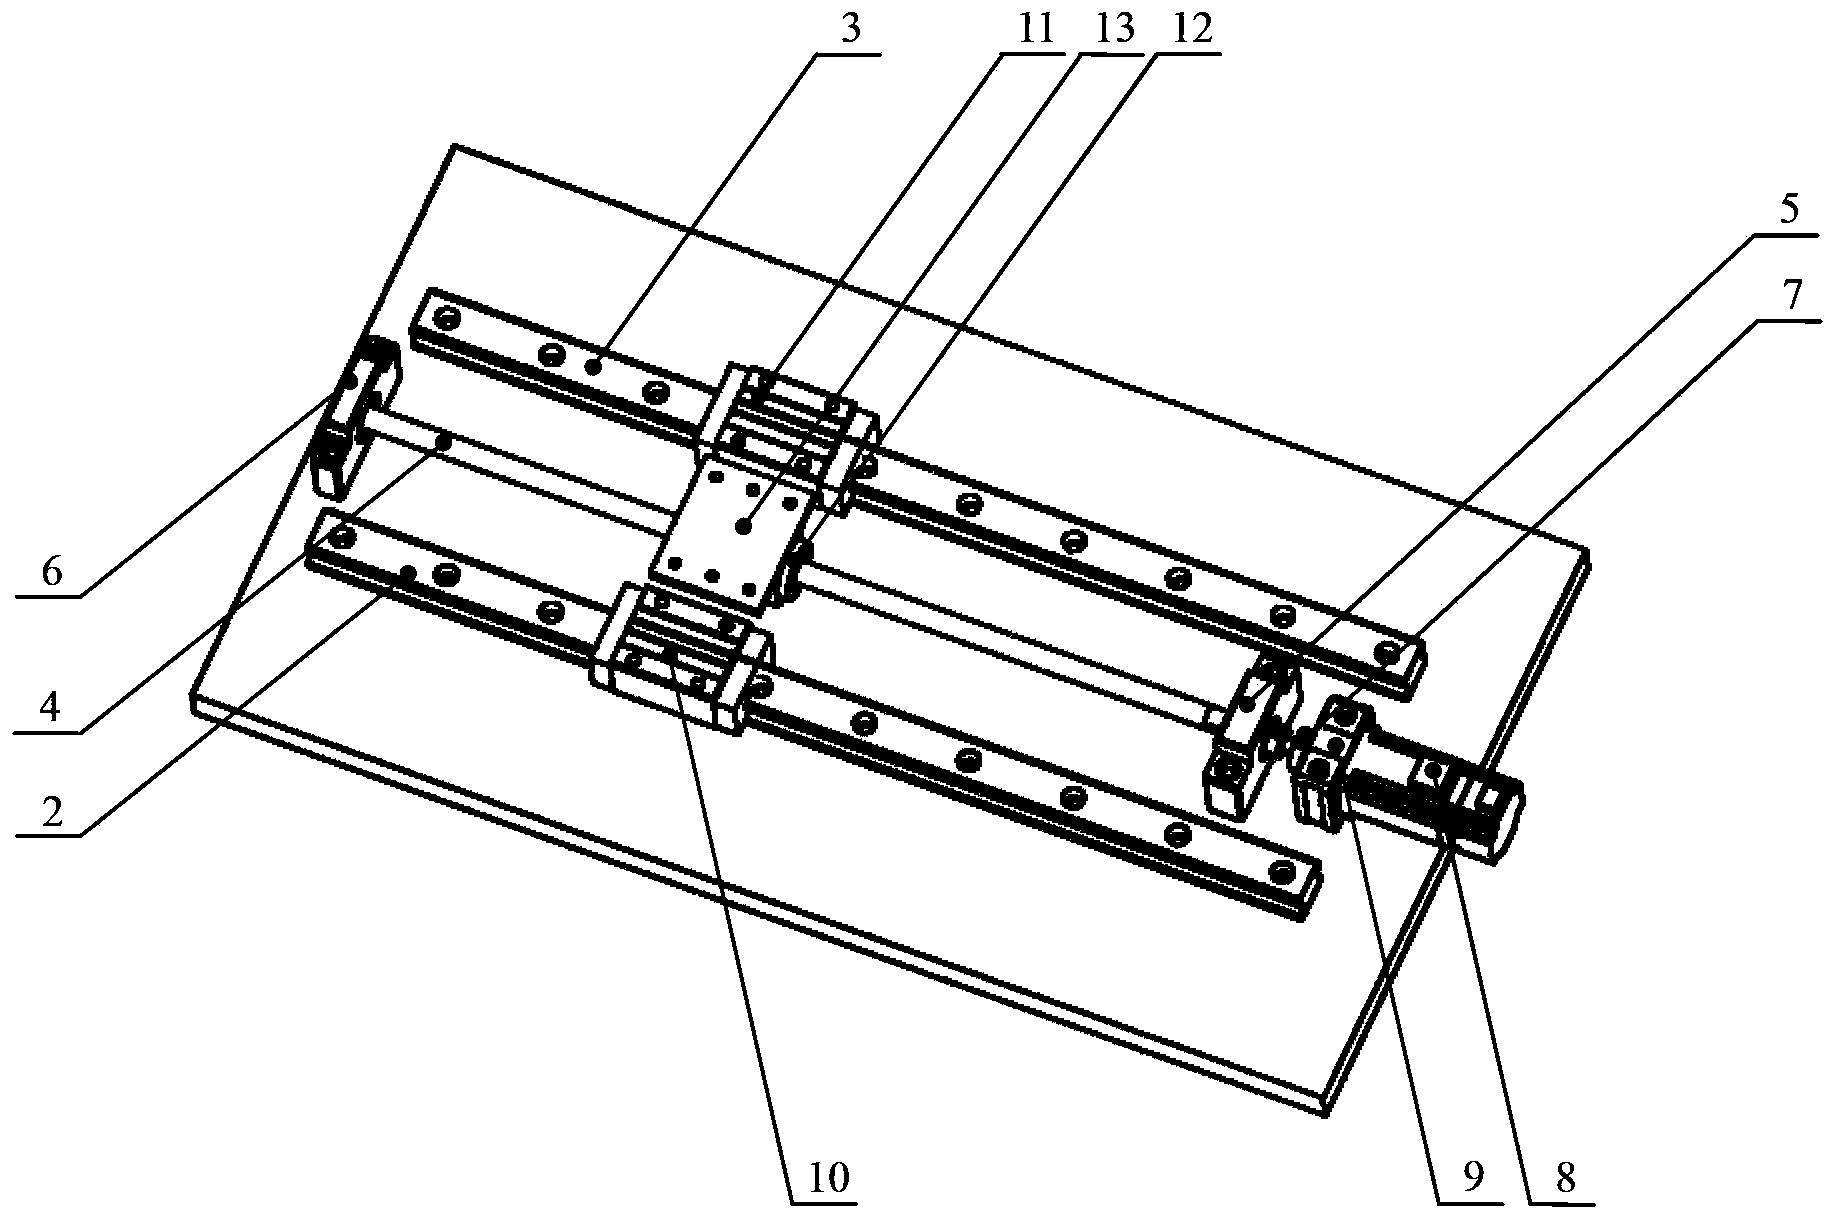 Planar continuous loading testing device for numerical-control movable worktable